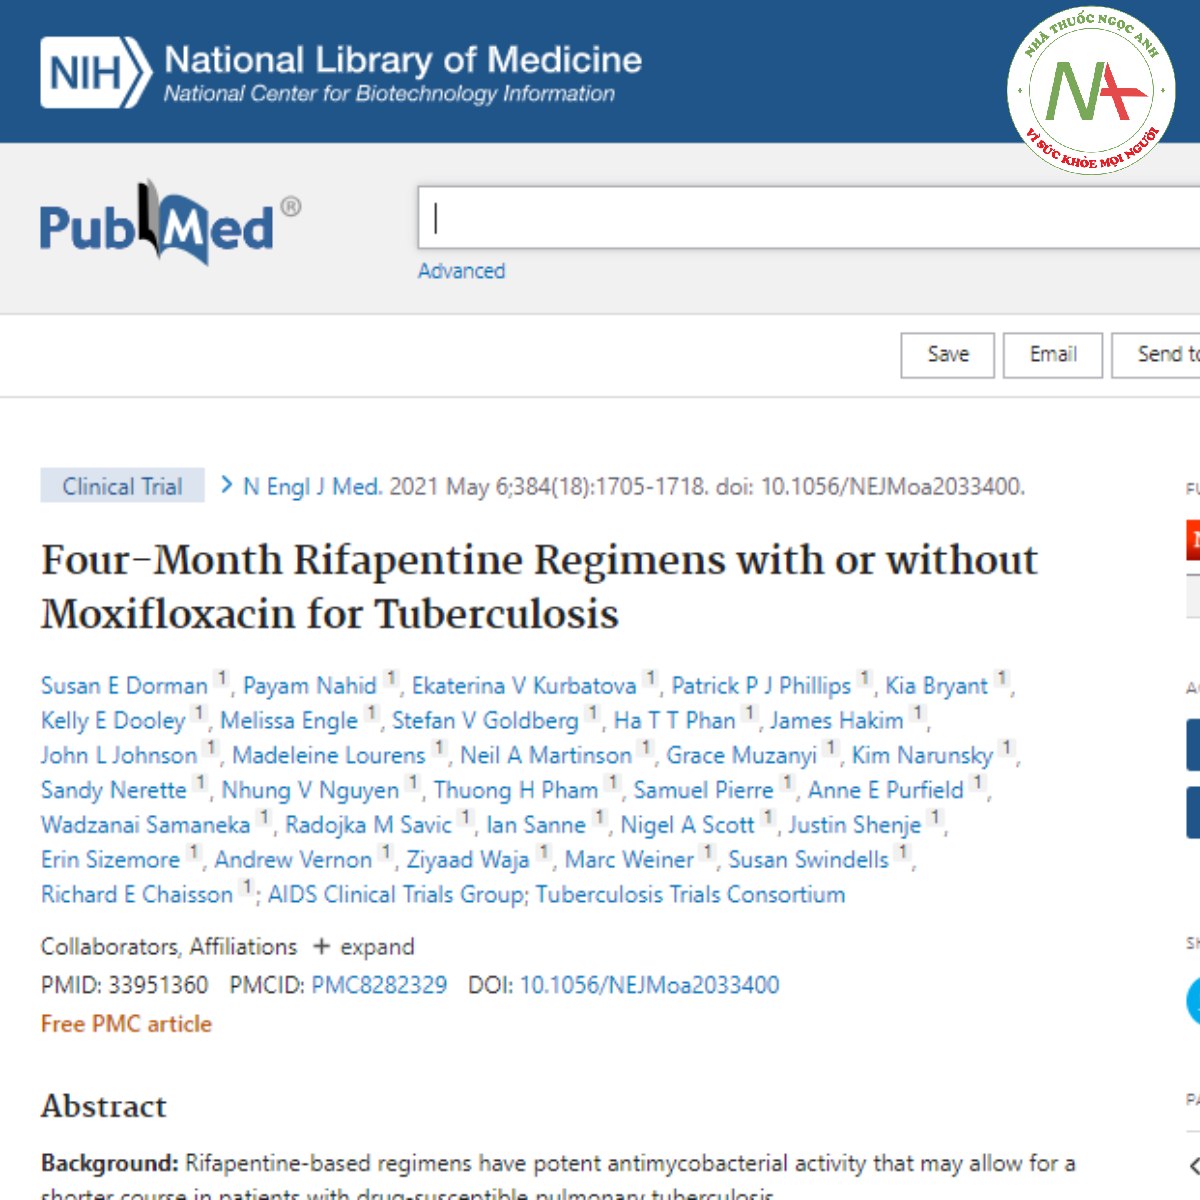 Four-Month Rifapentine Regimens with or without Moxifloxacin for Tuberculosis